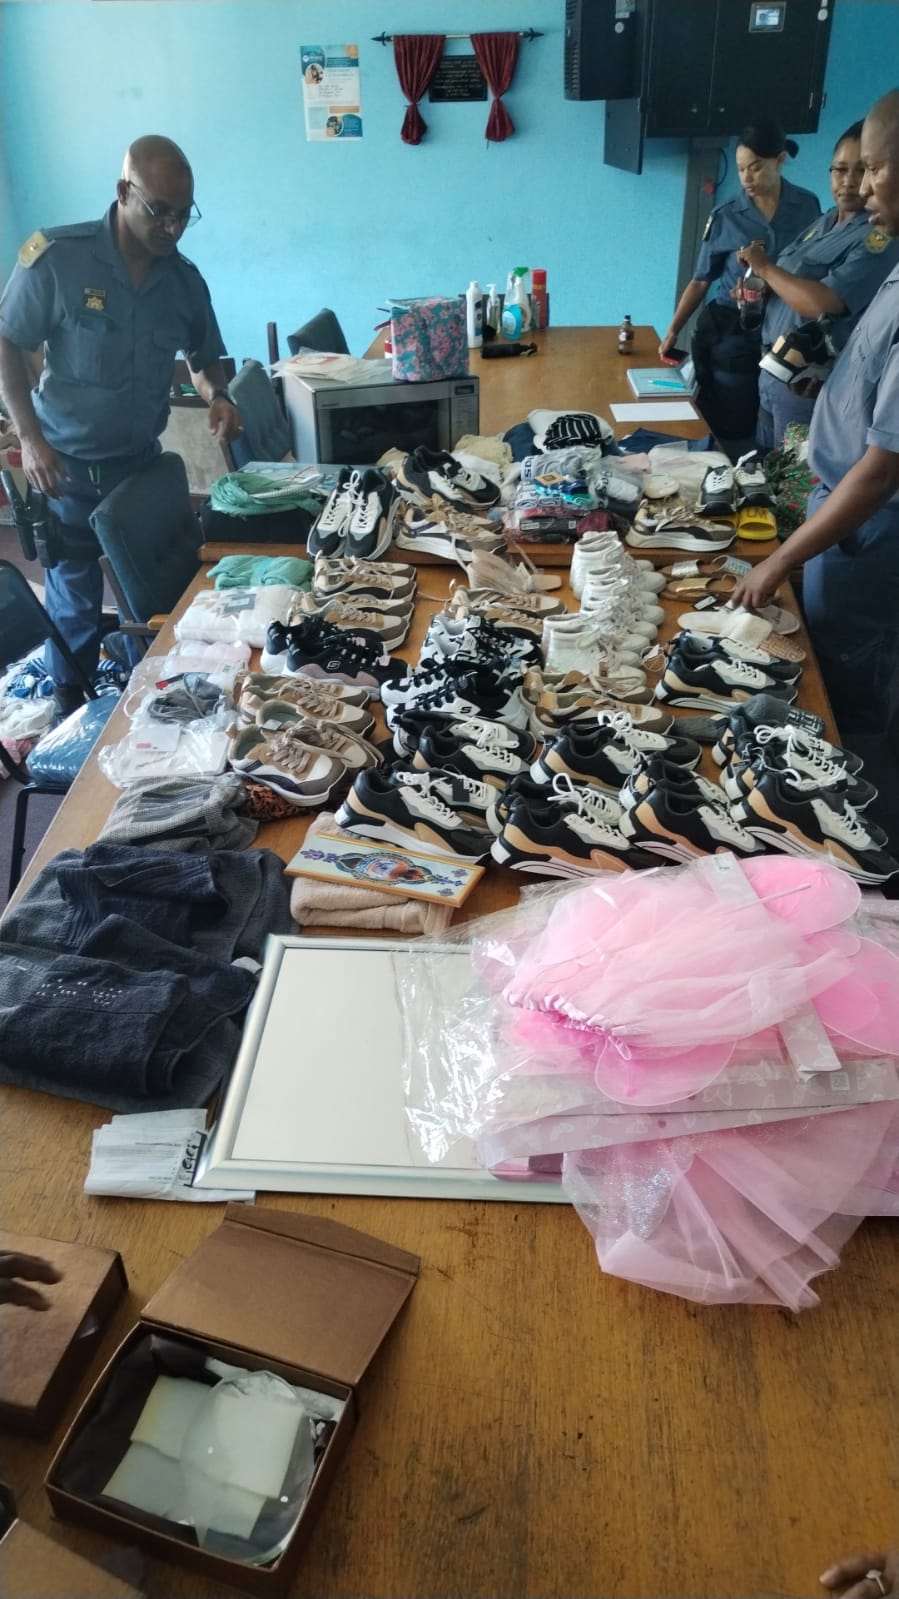 Police arrest suspects for possession of suspected stolen property